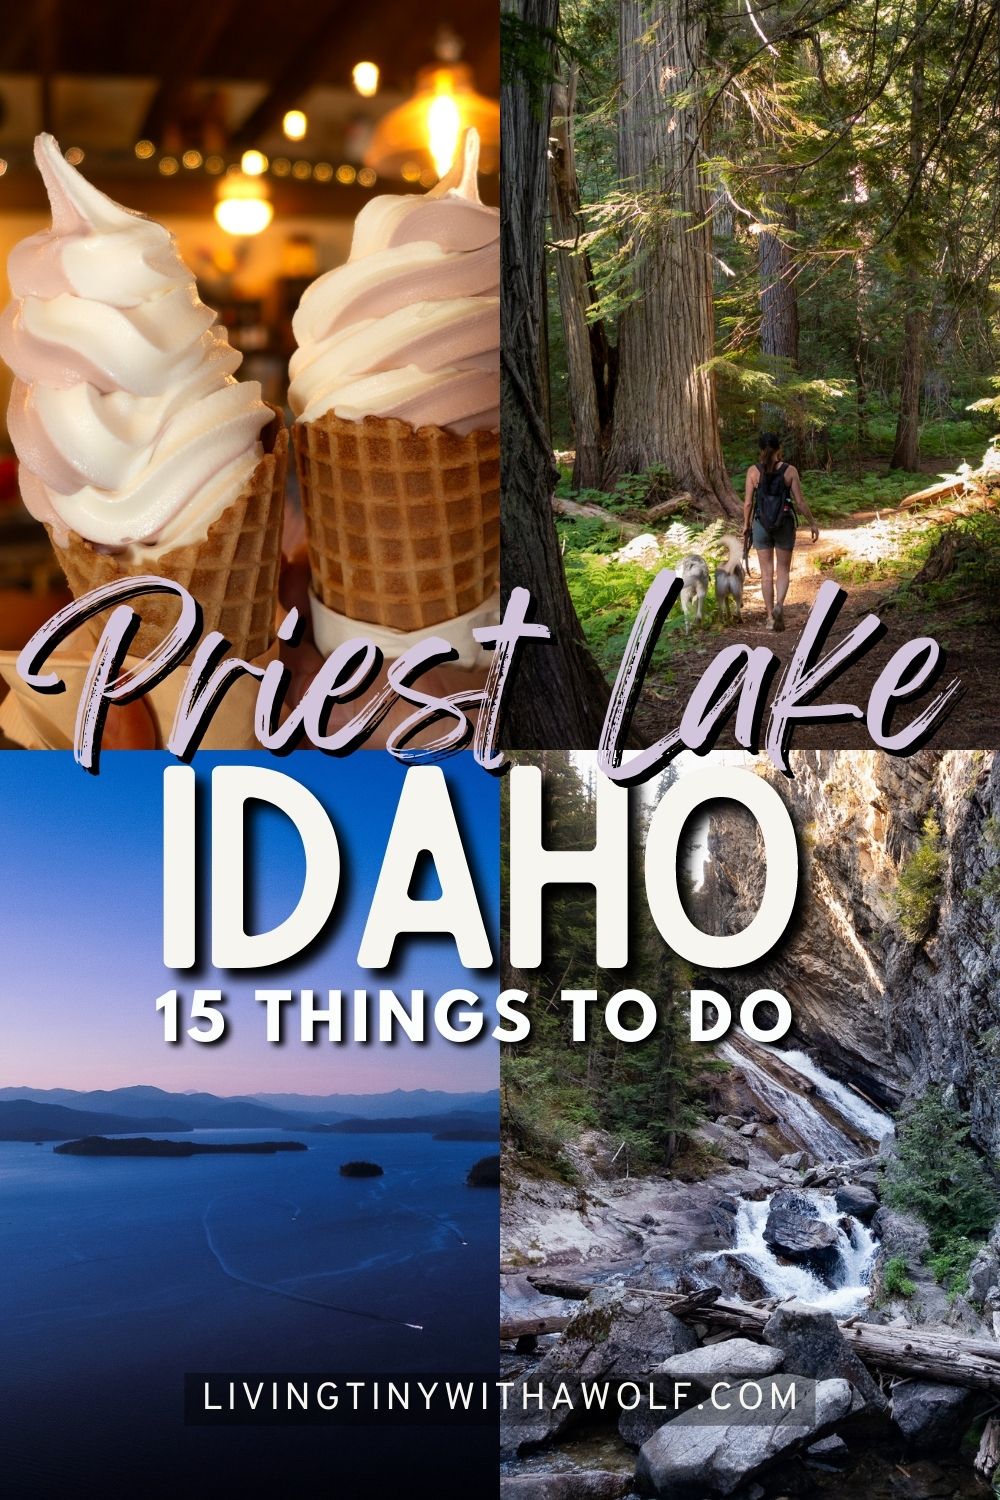 15 Best Things to do Priest Lake, Idaho in the Summer Sun!